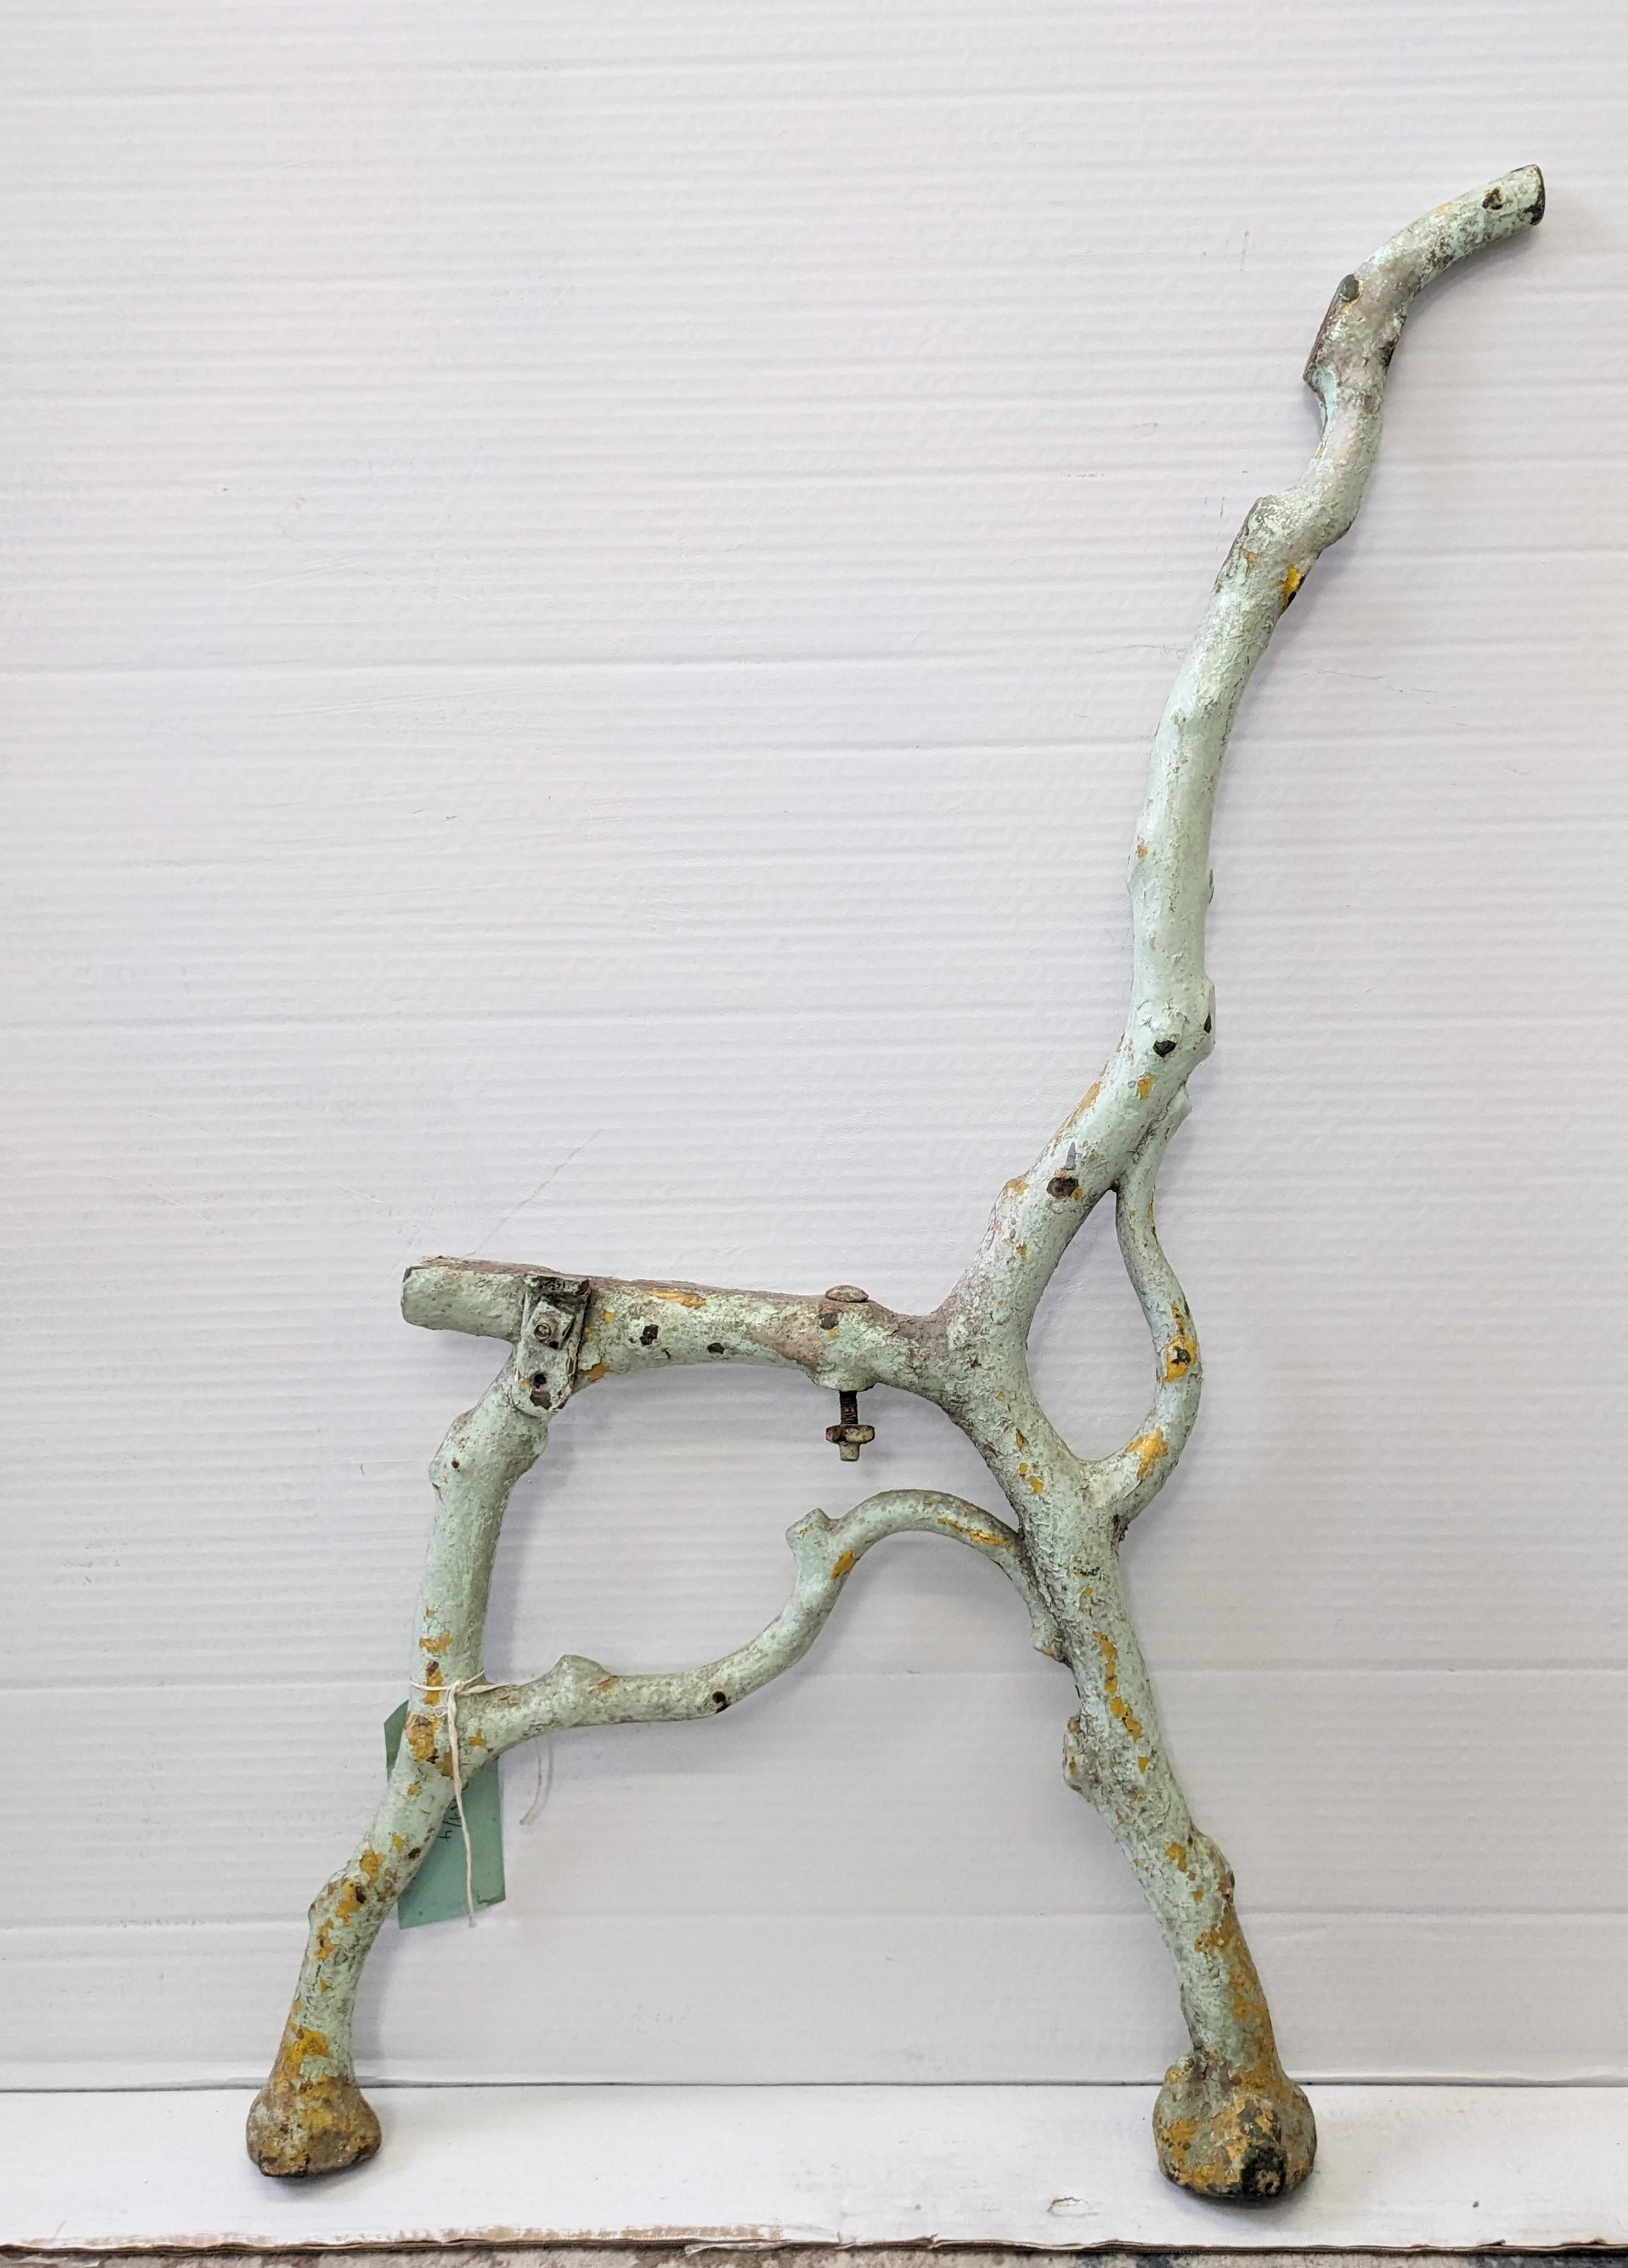 Pair of Victorian French Iron Faux Bois Bench Supports from the late 19th Century. Seafoam green, layered with many coats of paint with untouched patina. Made to look like naturalistic twigs in heavy cast iron. 
Normally wood slats would be bolted